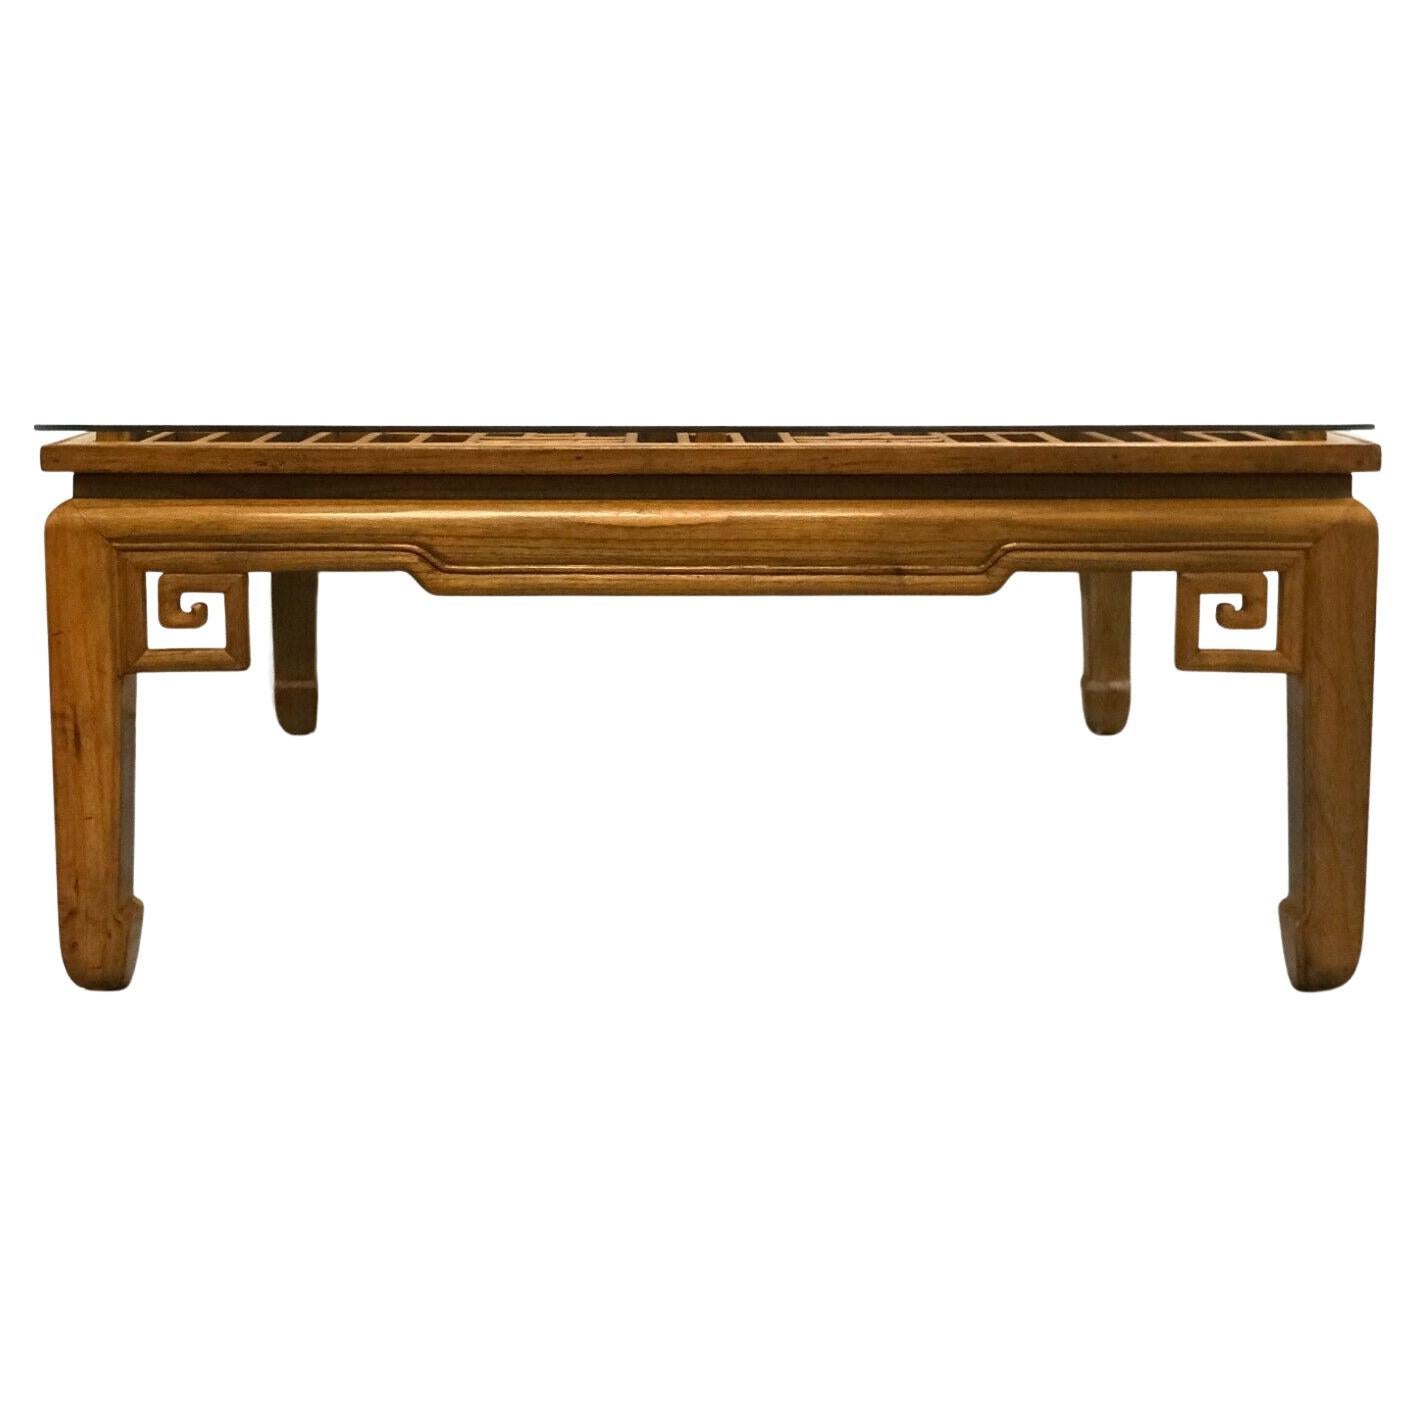 We are delighted to offer for sale this gorgeous large square Chinese coffee table with glass top.

The small pieces of teak are individually put together to form a nice classic pattern. The glass is standing on top of teak in each corner, giving